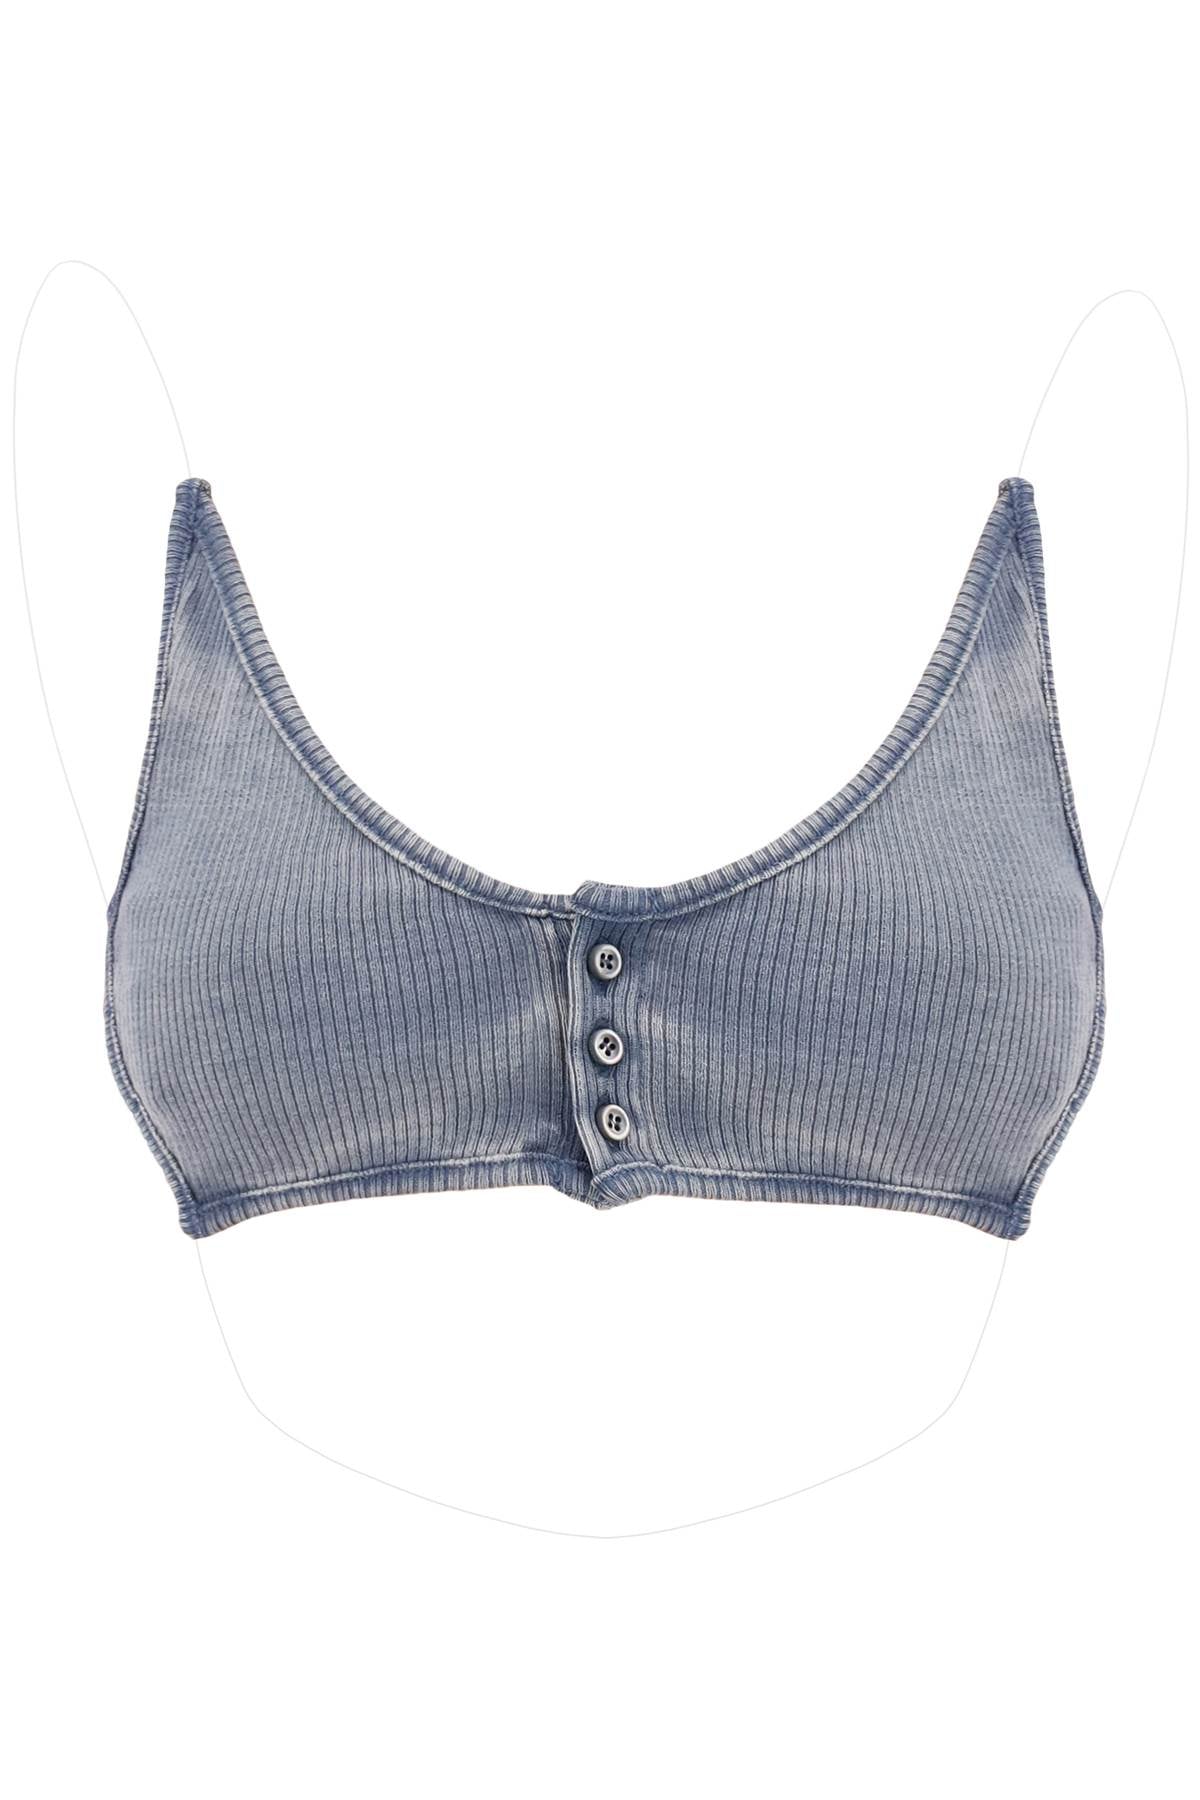 Y project invisible strap crop top with spaghetti-0